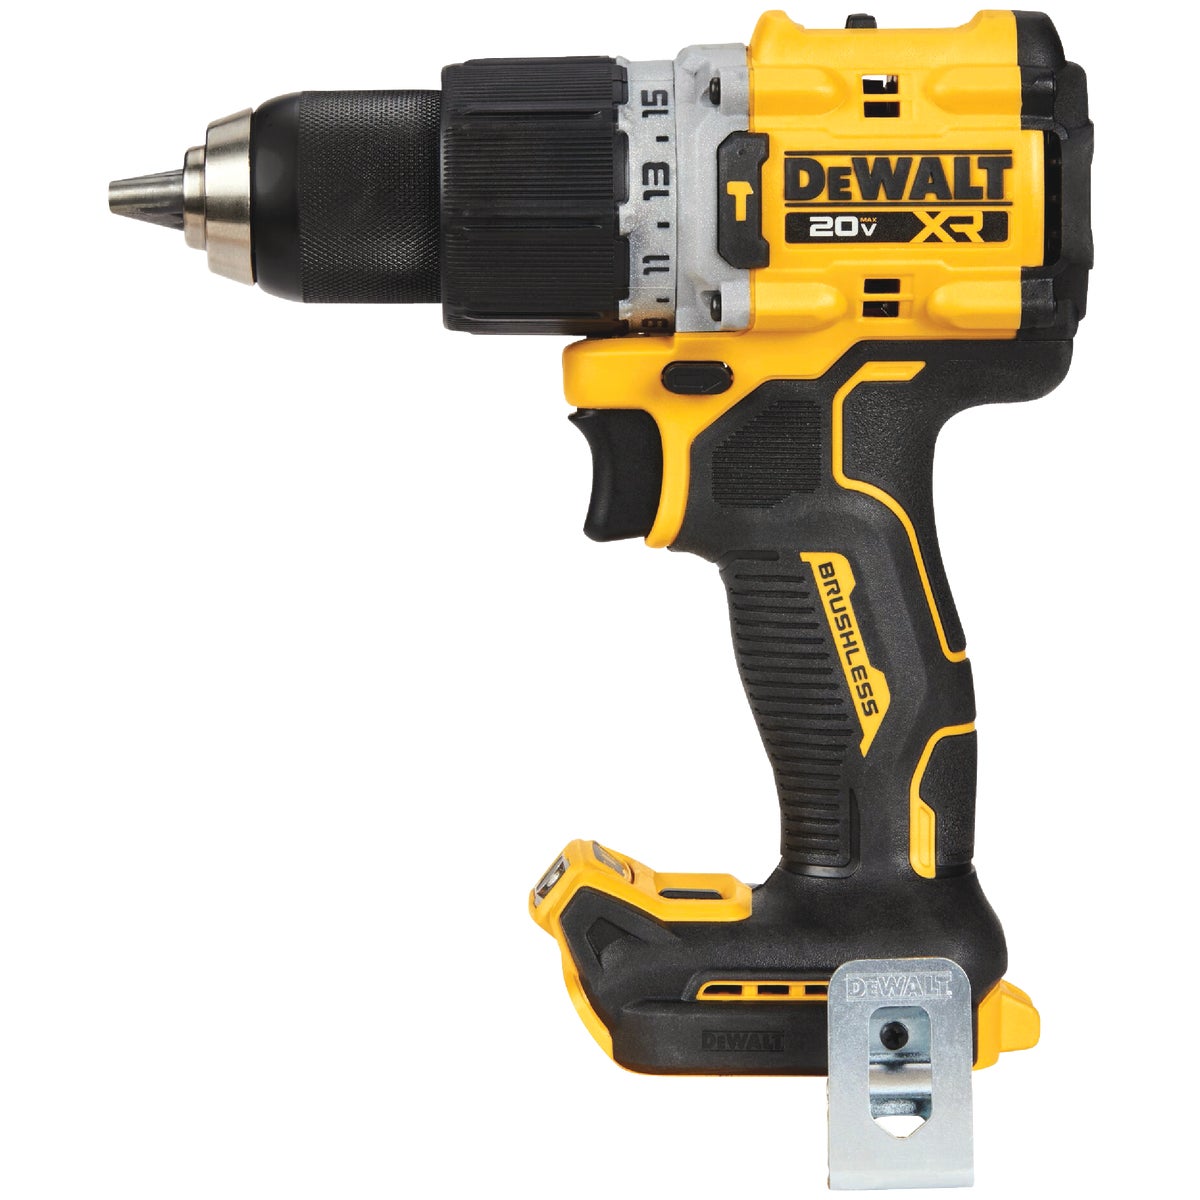 DEWALT 20V MAX XR Lithium-Ion Brushless 1/2 In. Compact Cordless Hammer Drill (Tool Only)